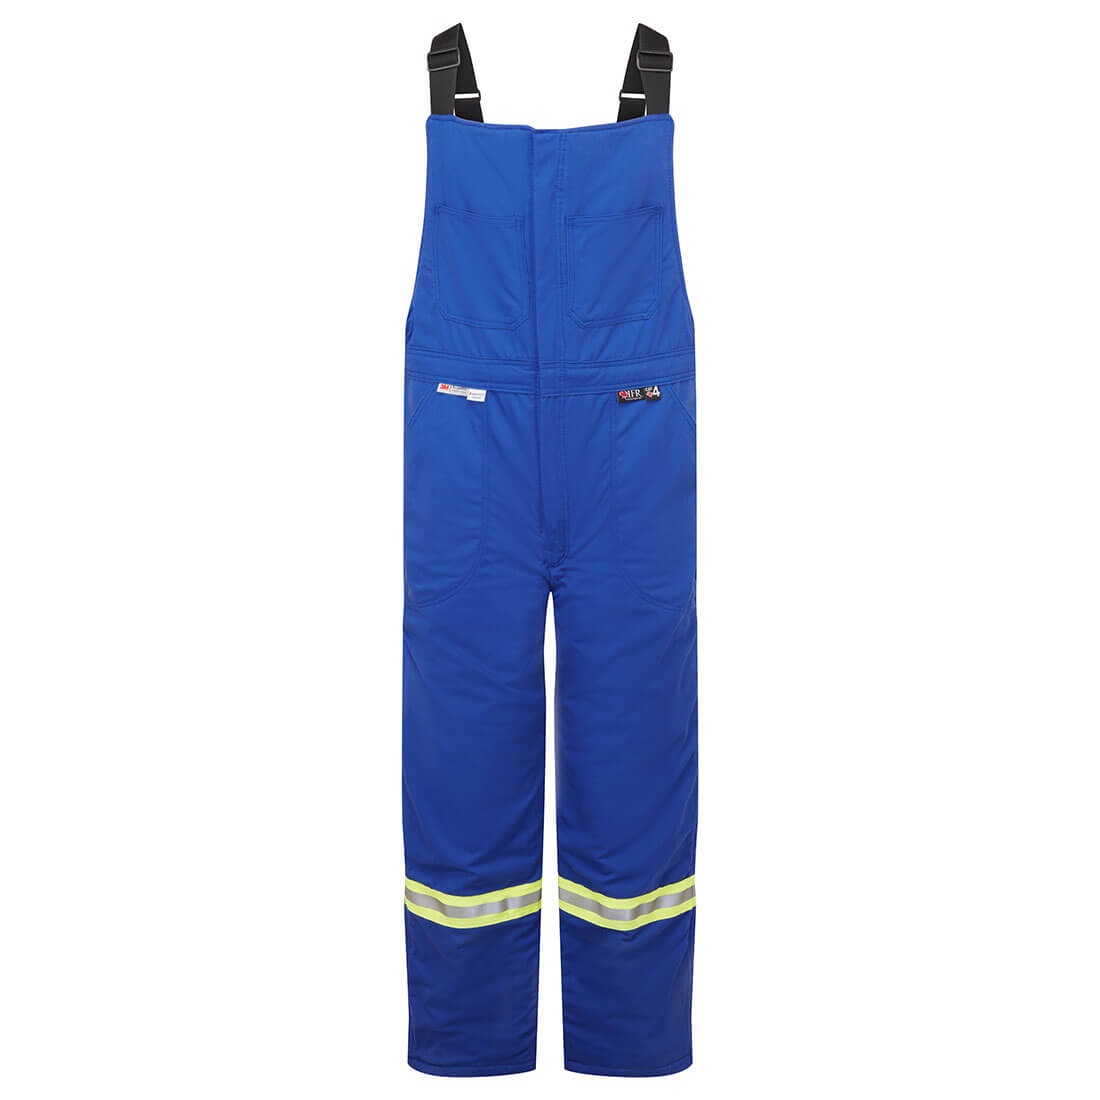 IFR Flame Resistant, Insulated Bib Pants